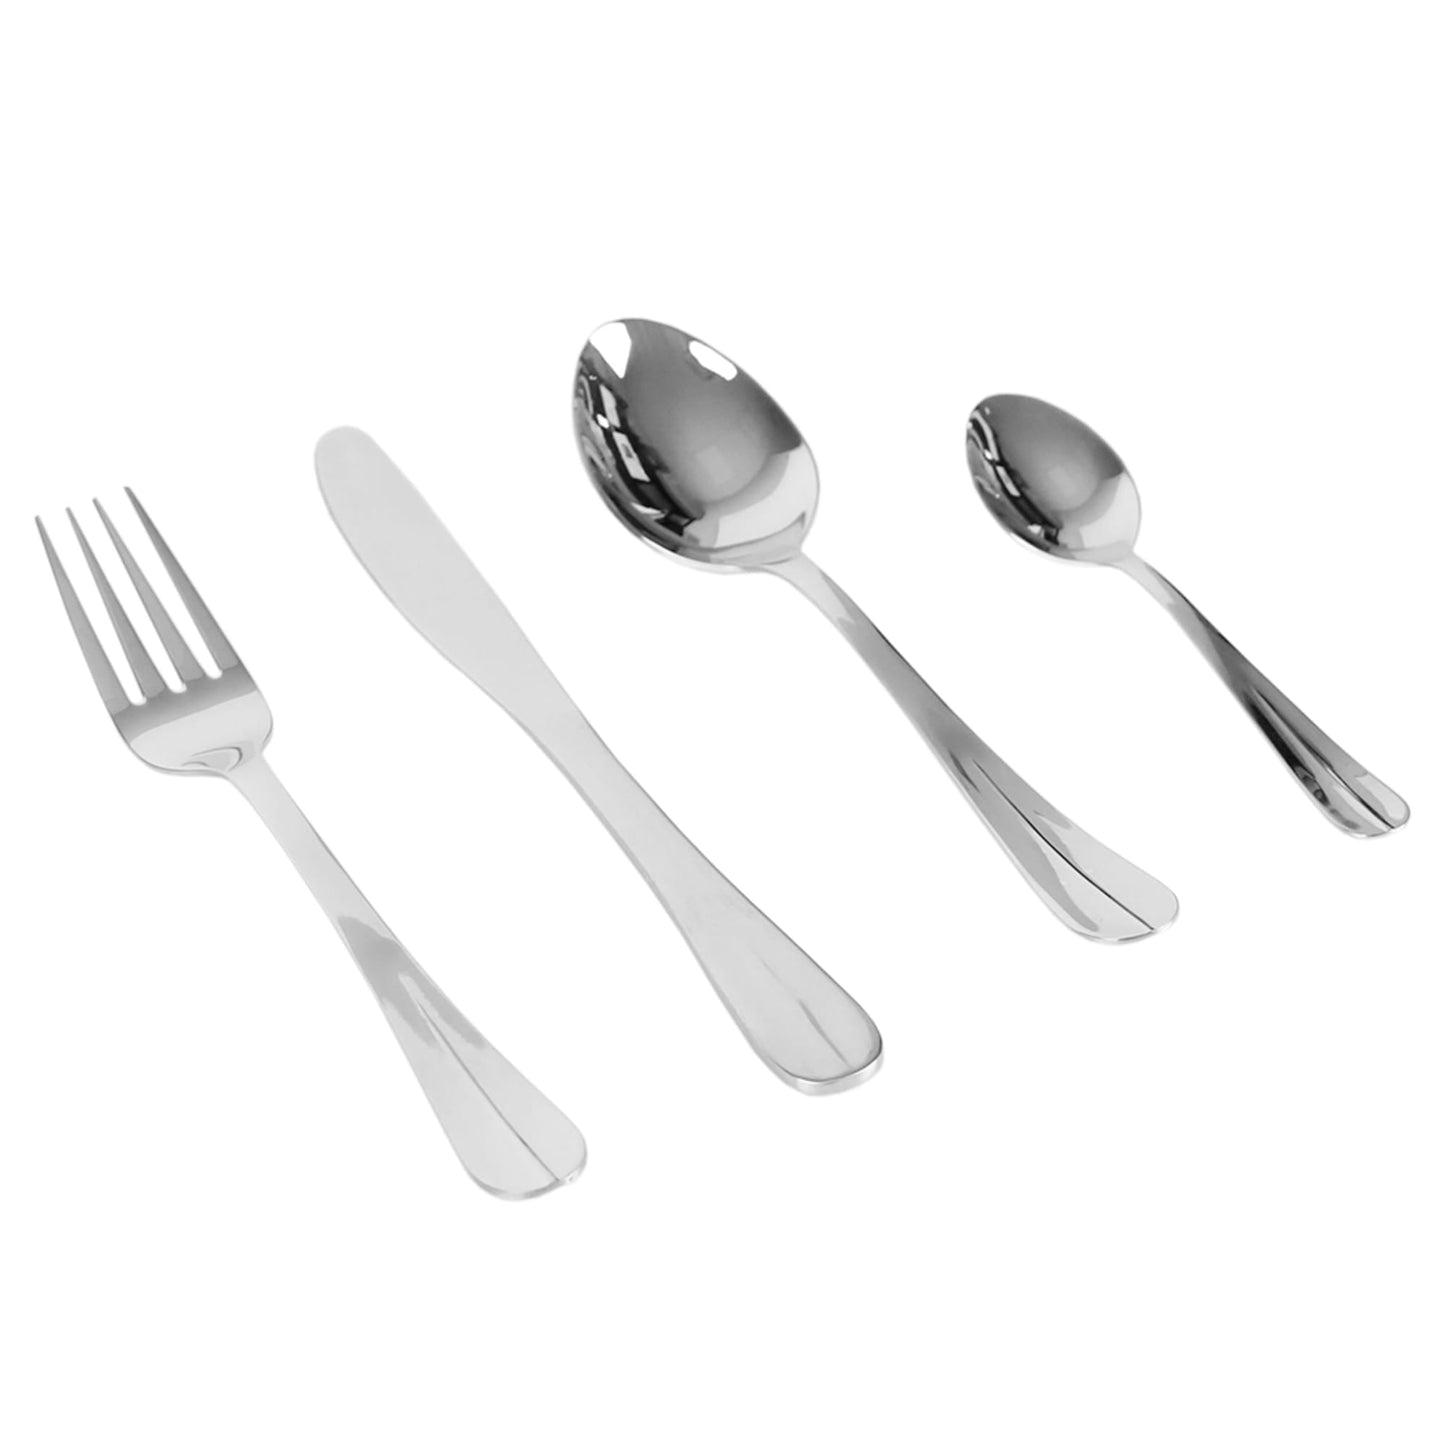 Piper 16 Piece Stainless Steel Flatware Set, Silver